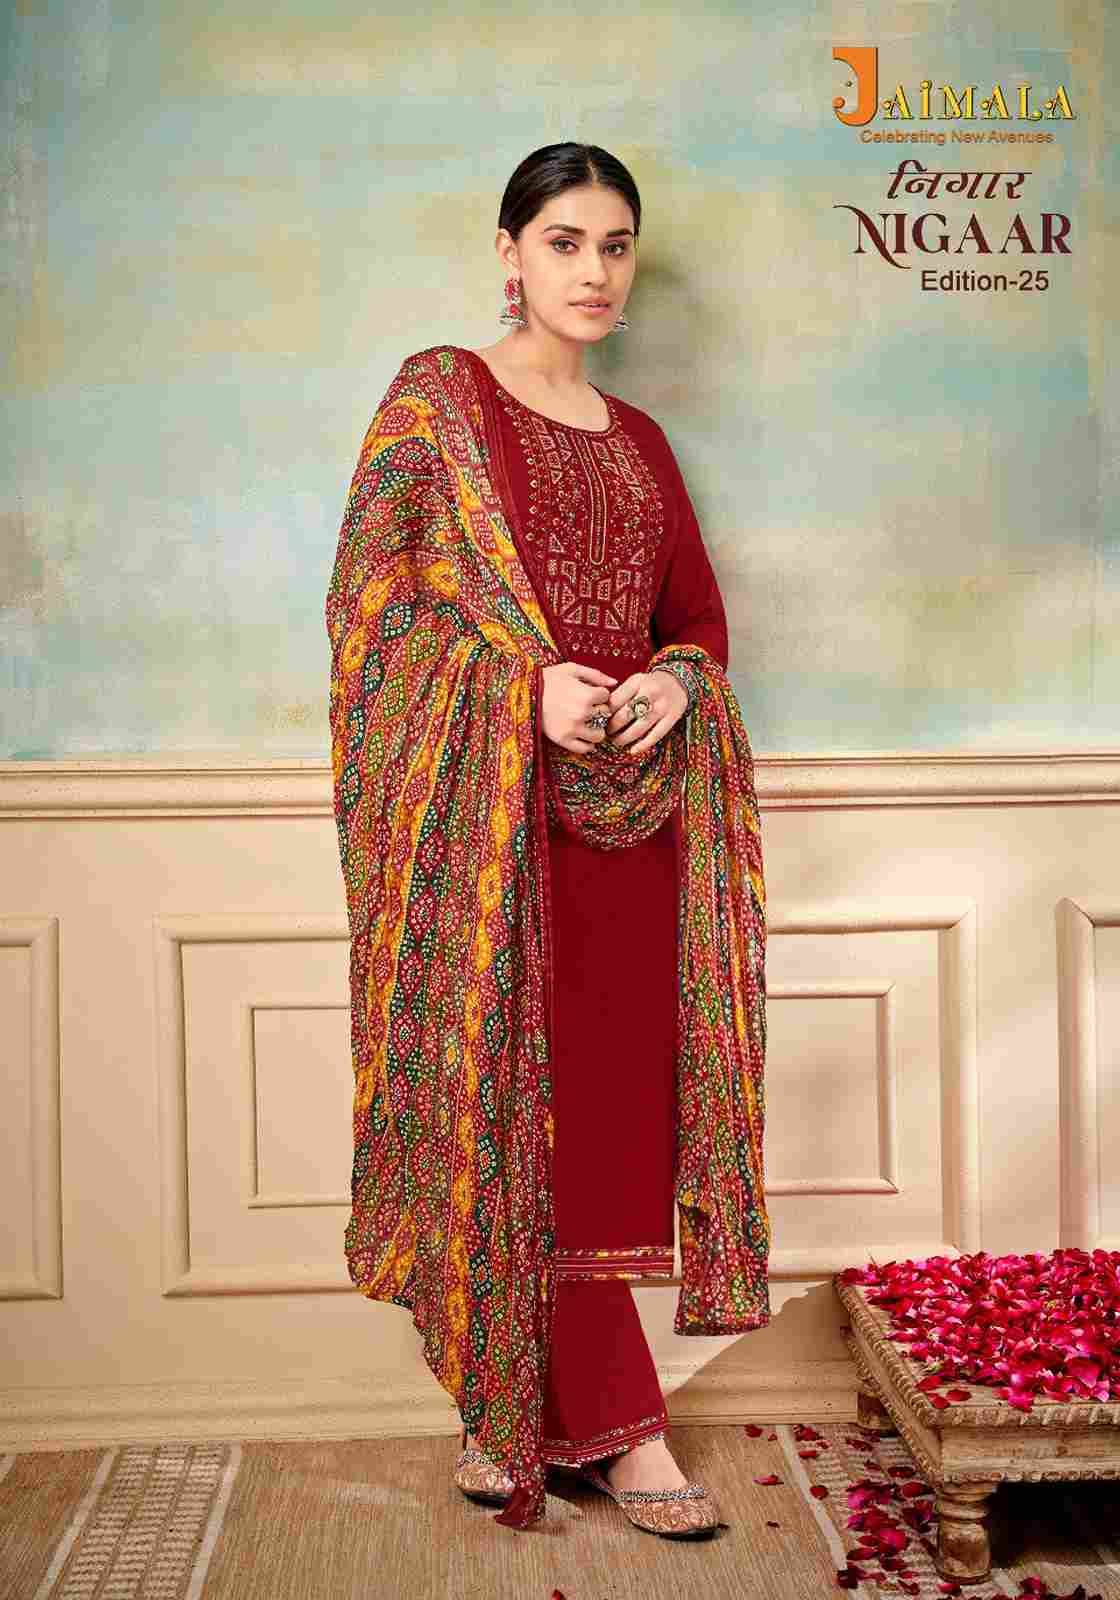 Nigaar Vol-25 By Jaimala 1461-001 To 1461-008 Series Beautiful Festive Suits Colorful Stylish Fancy Casual Wear & Ethnic Wear Pure Rayon Slub With Work Dresses At Wholesale Price